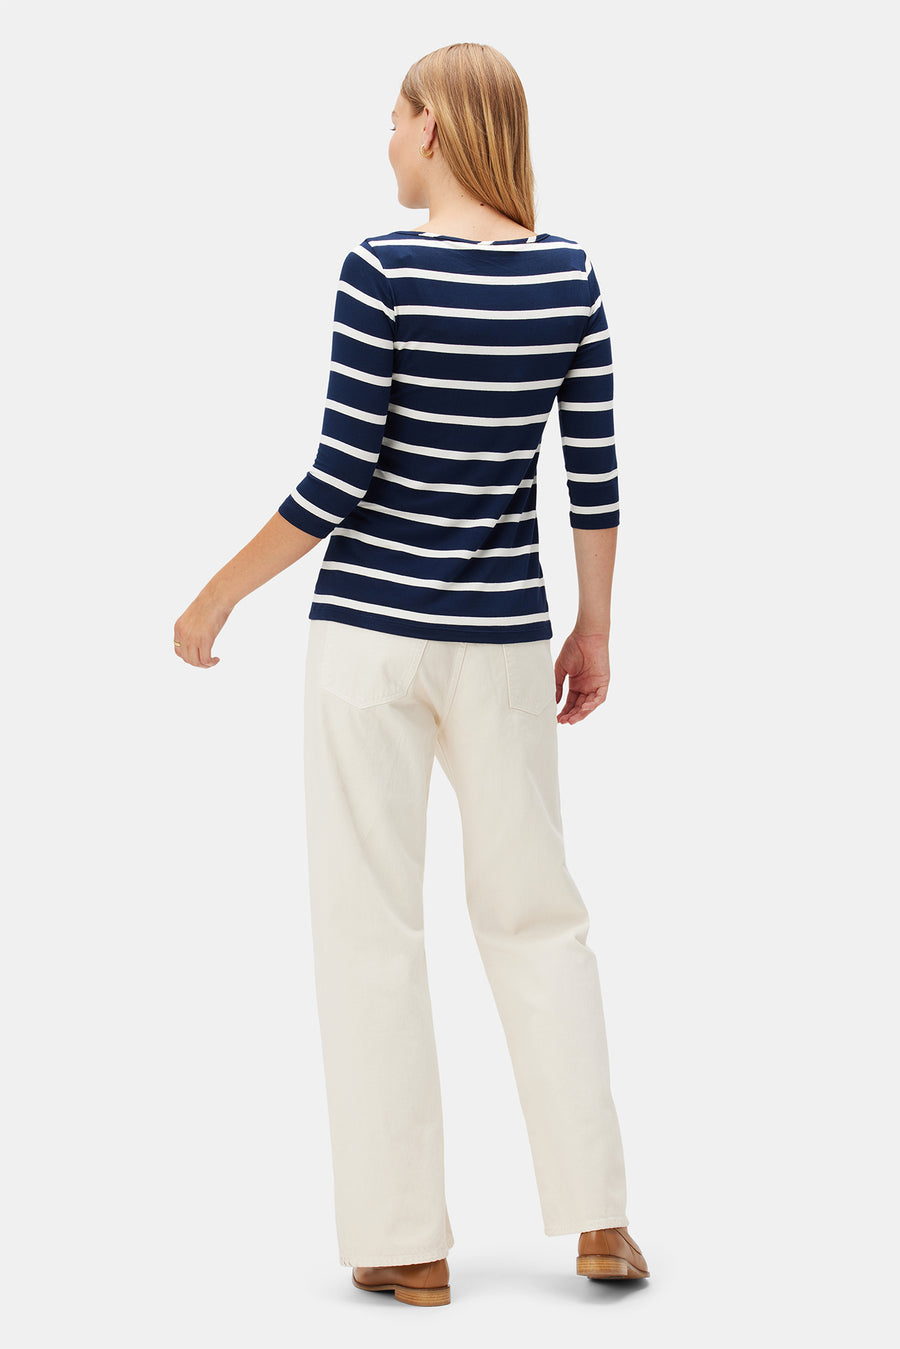 Francoise 3/4 Sleeve Dream Knit Tee - Ivory Navy Rugby Stripe